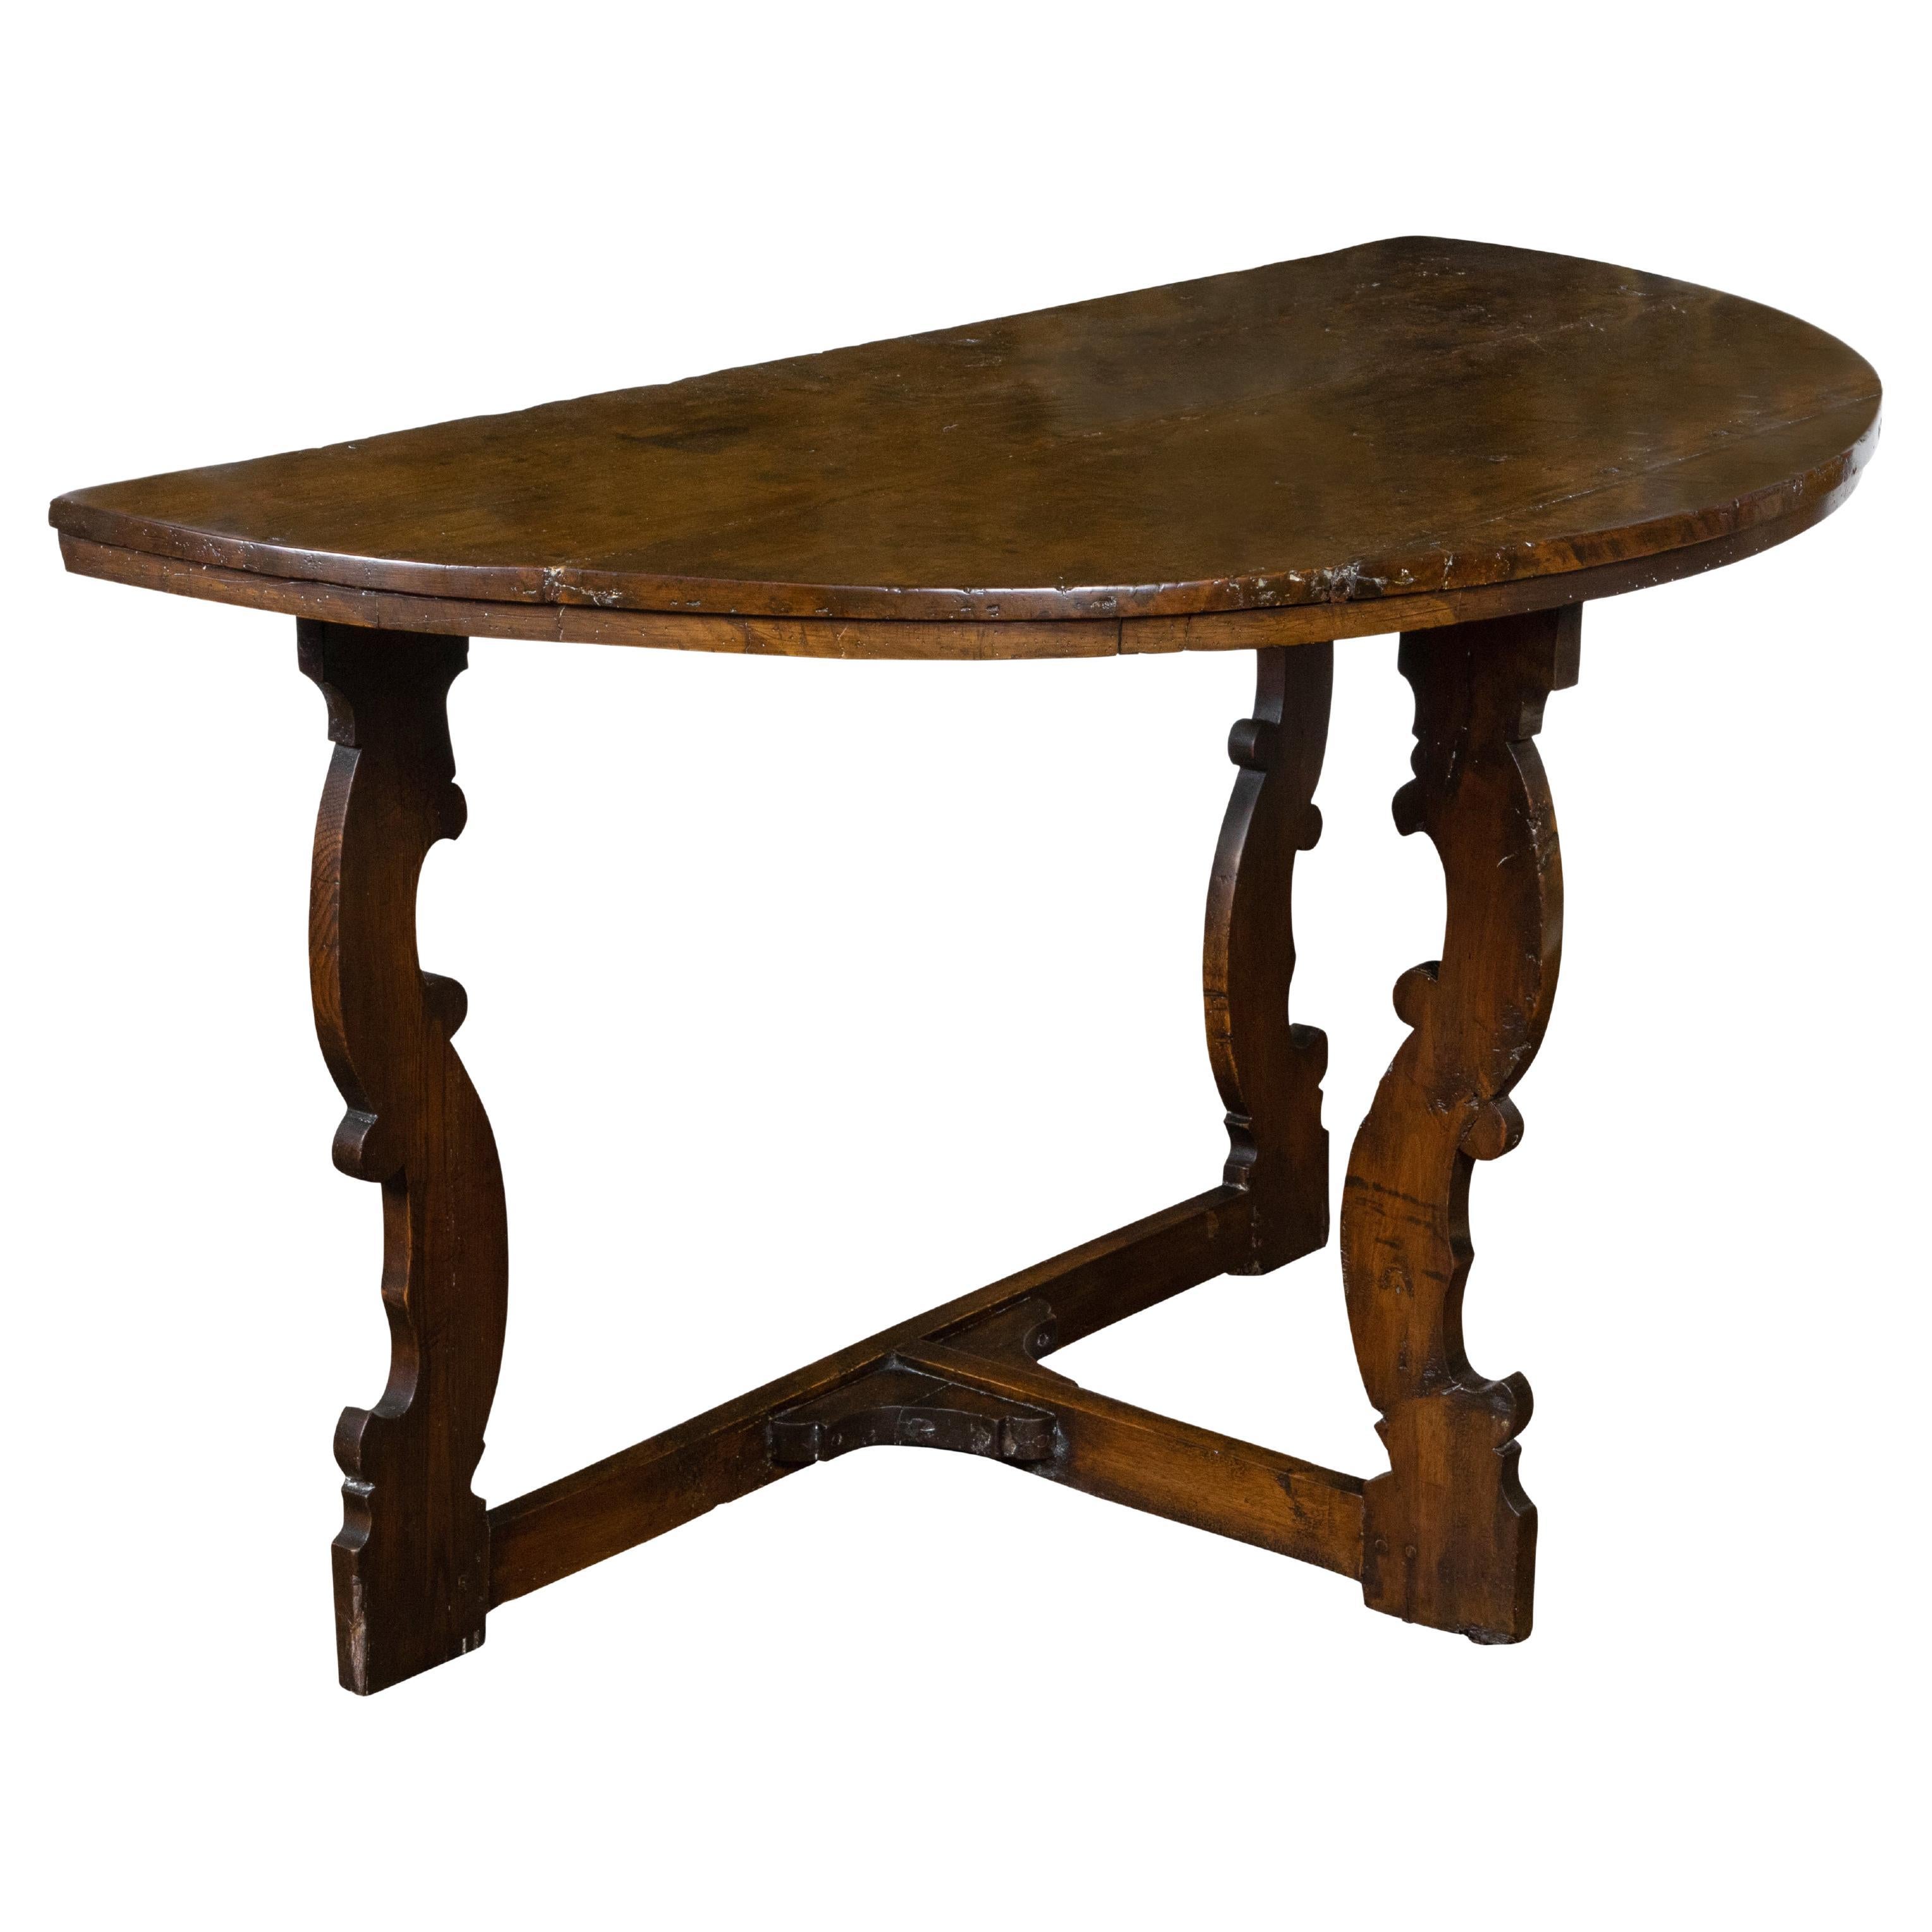 Large Italian Baroque Style 18th Century Walnut Demilune Table with Carved Legs For Sale